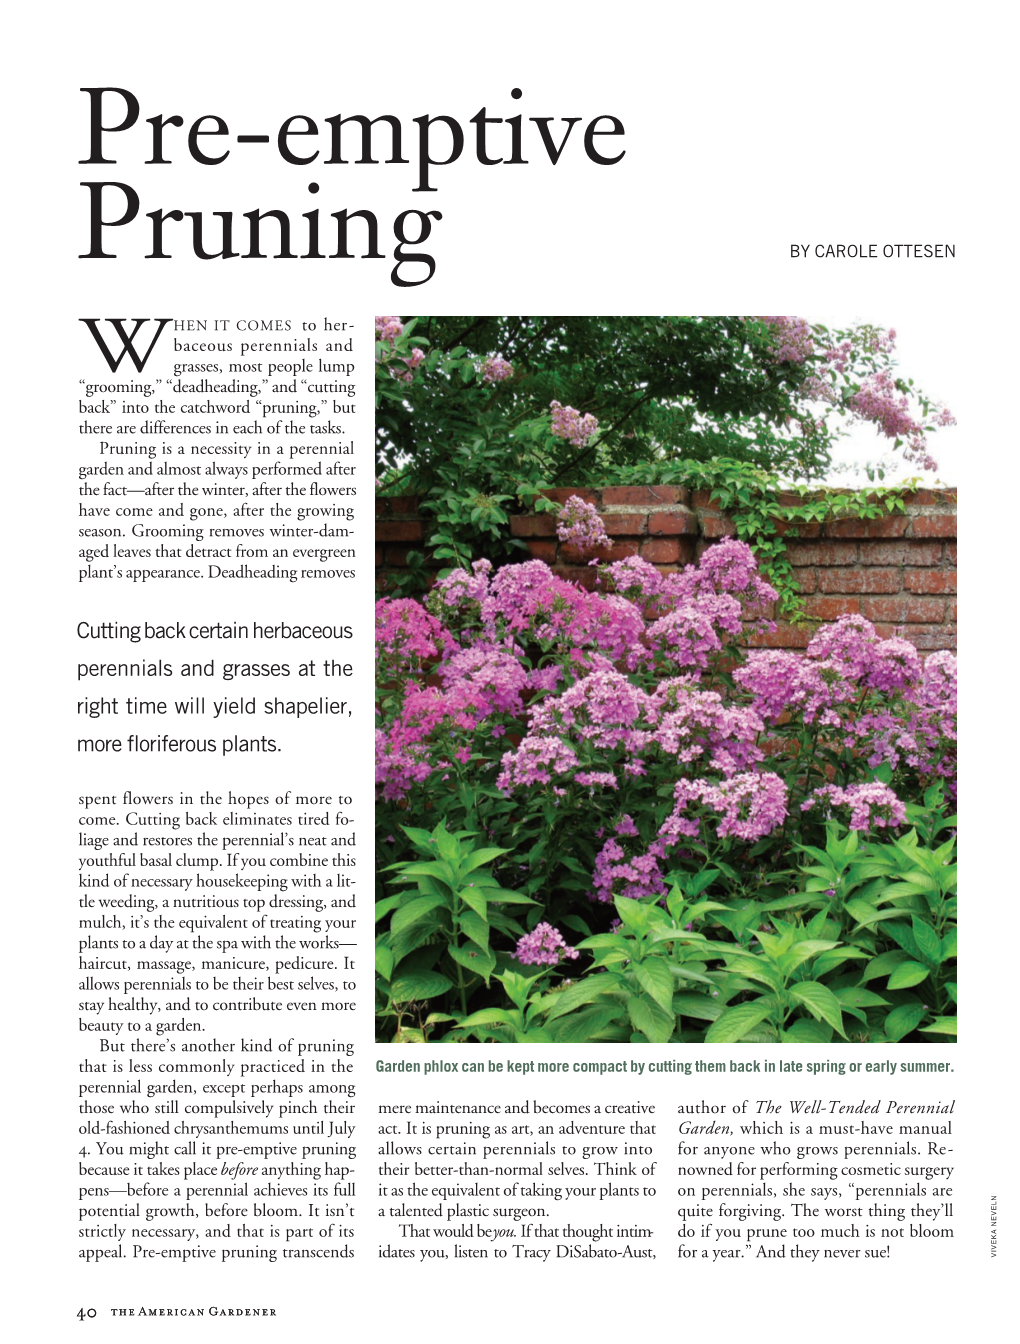 Pre-Emptive Pruning Allows Certain Perennials to Grow Into for Anyone Who Grows Perennials